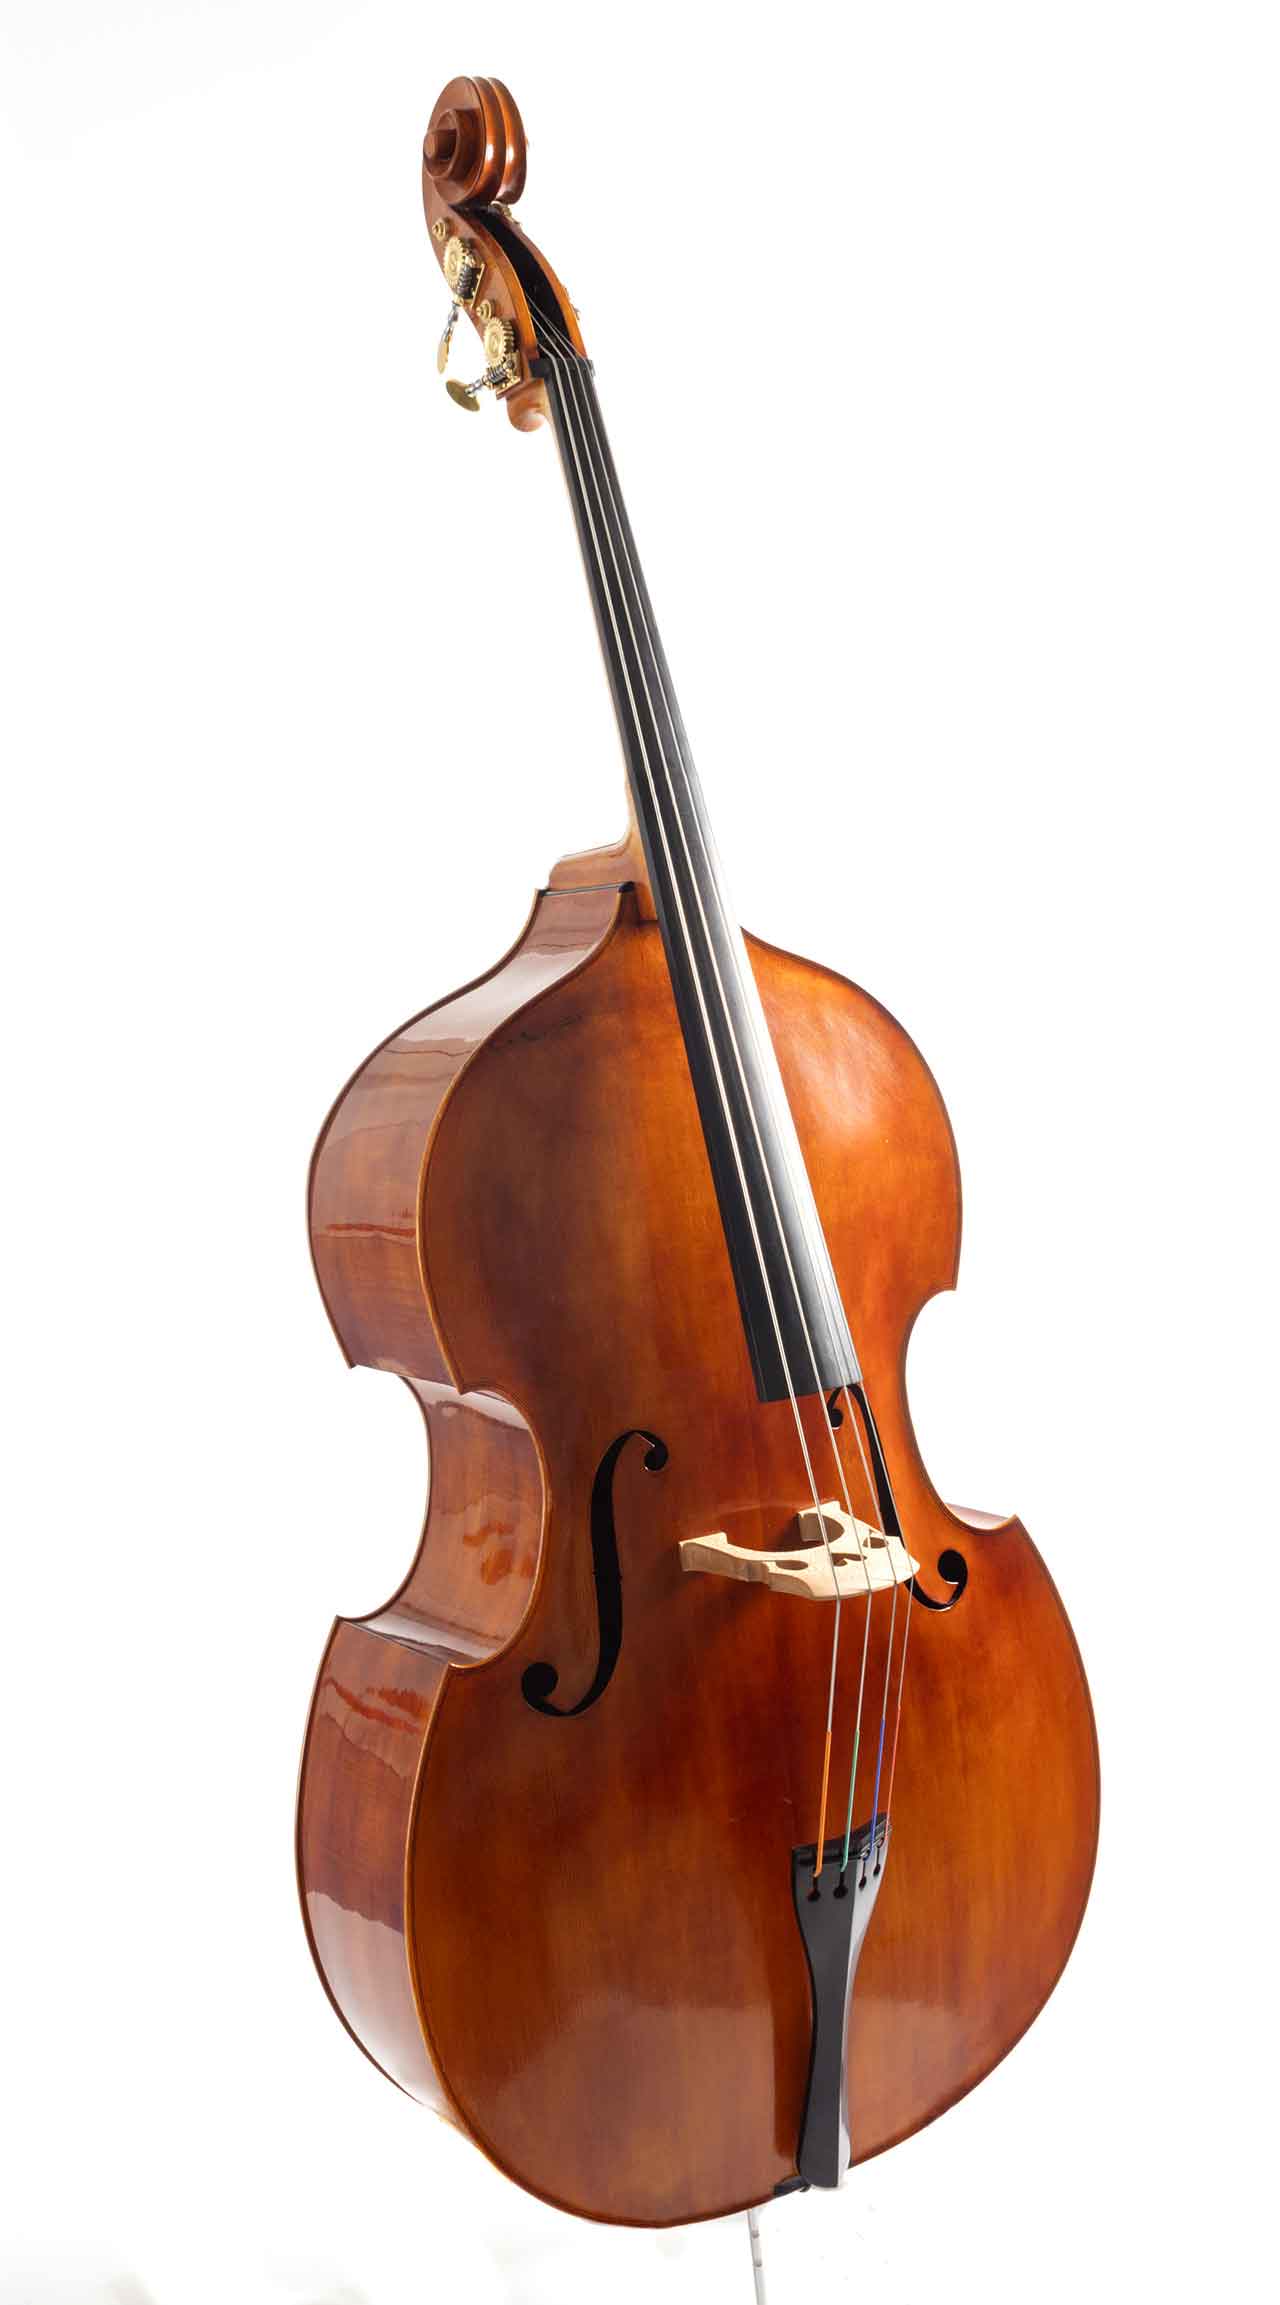 William A Mackay Double bass in the style of the English bass makers For Sale